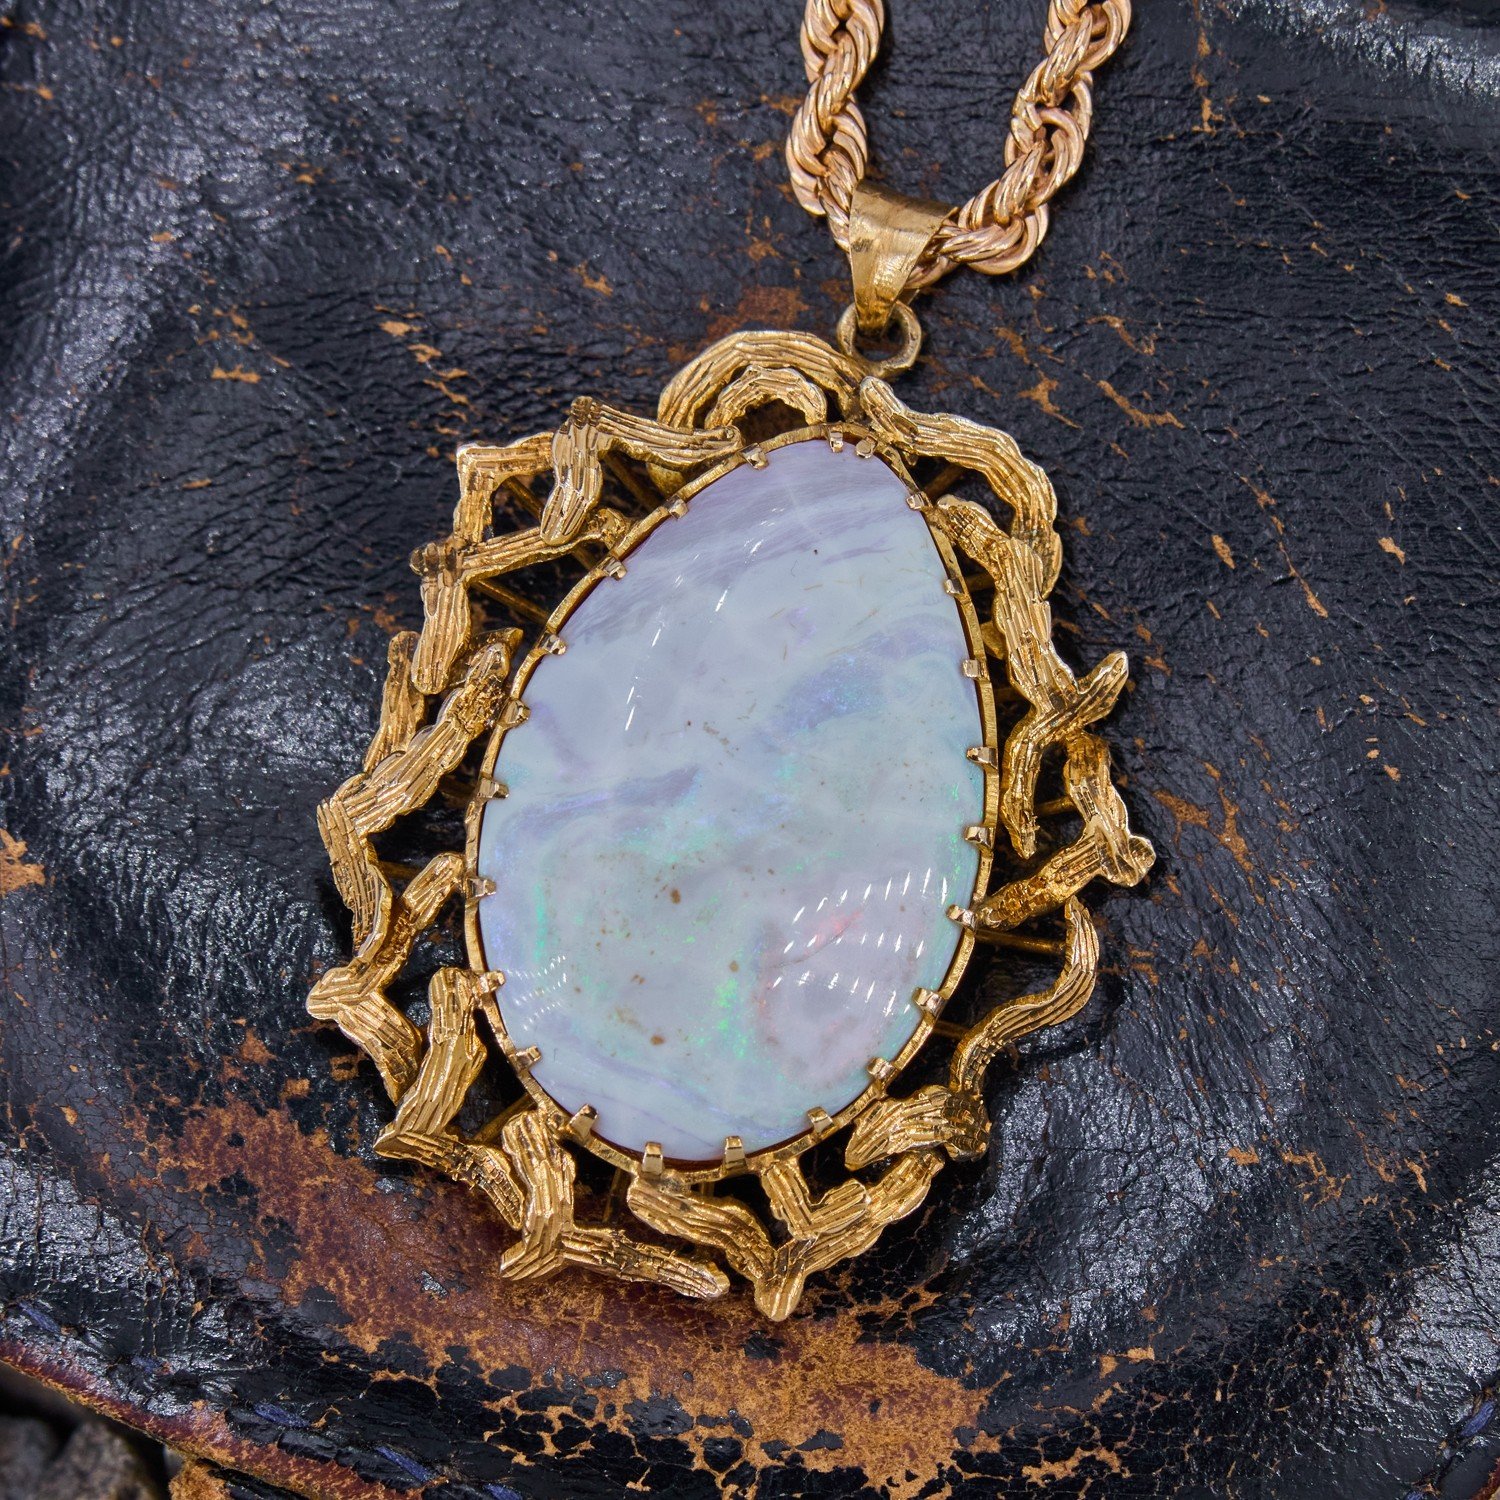 Pendant (14k gold) with an opal and a diamond